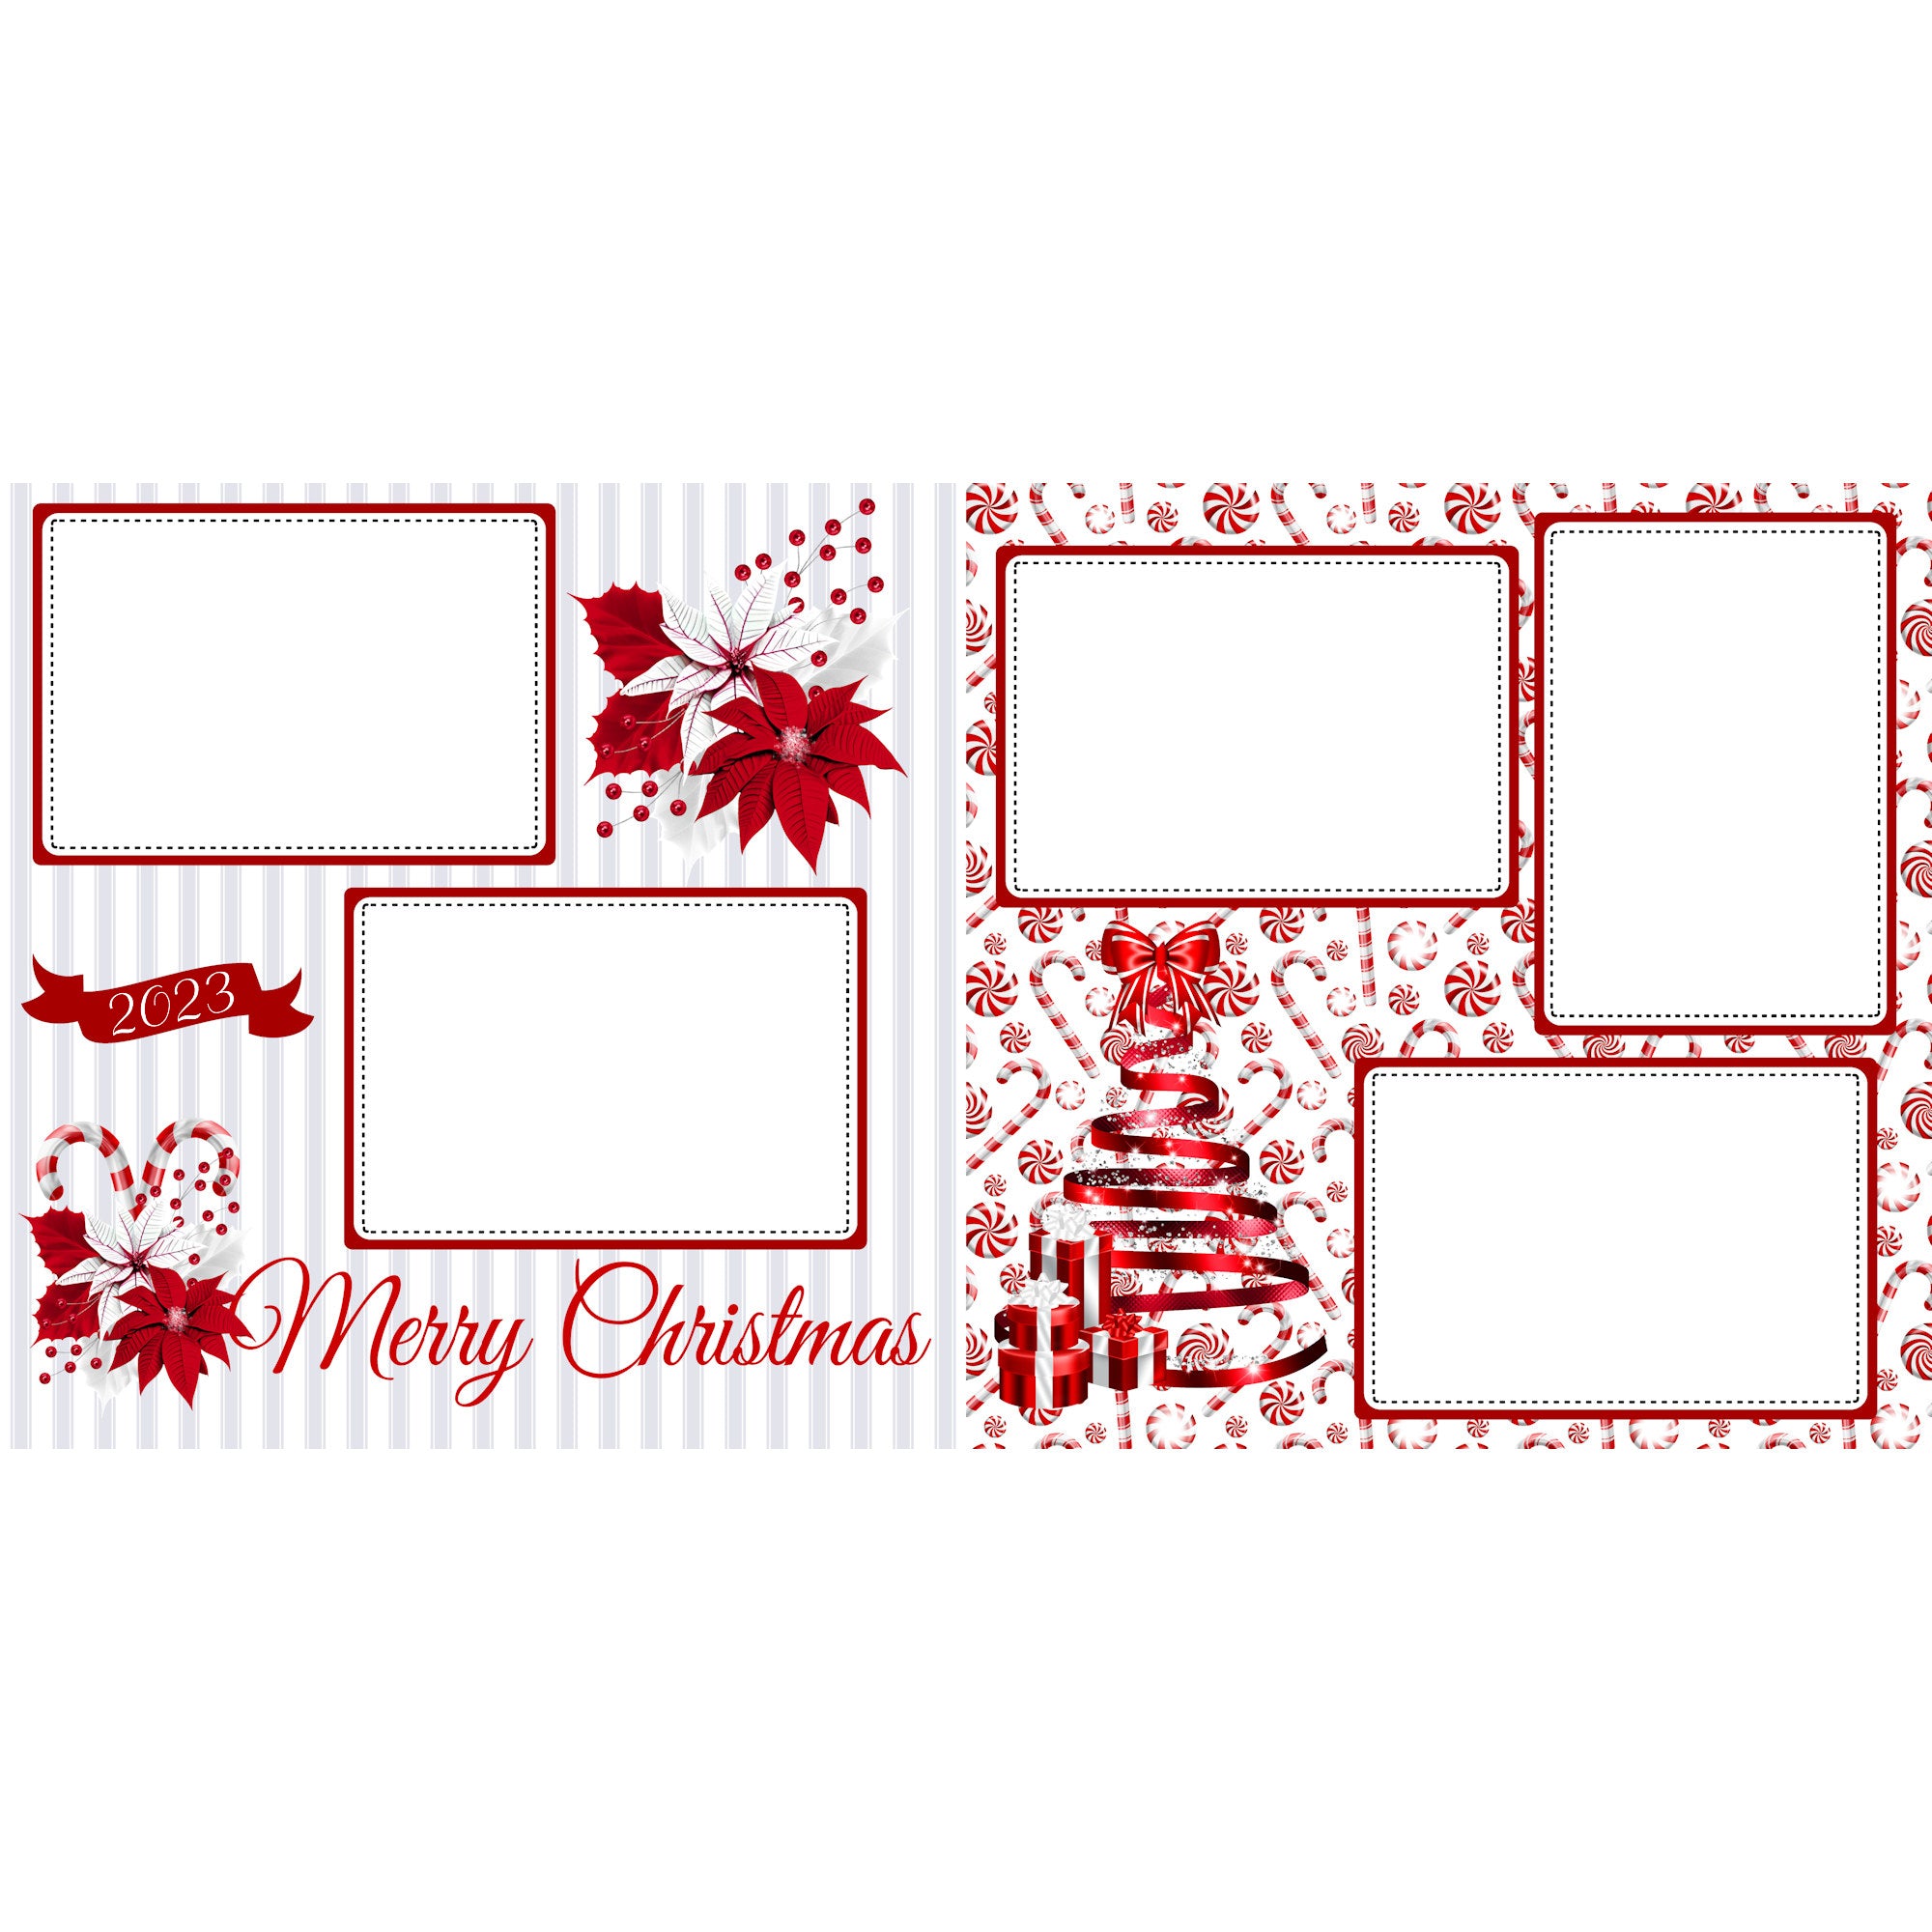 Peppermint Christmas 2023 (2) - 12 x 12 Premade, Printed Scrapbook Pages by SSC Designs